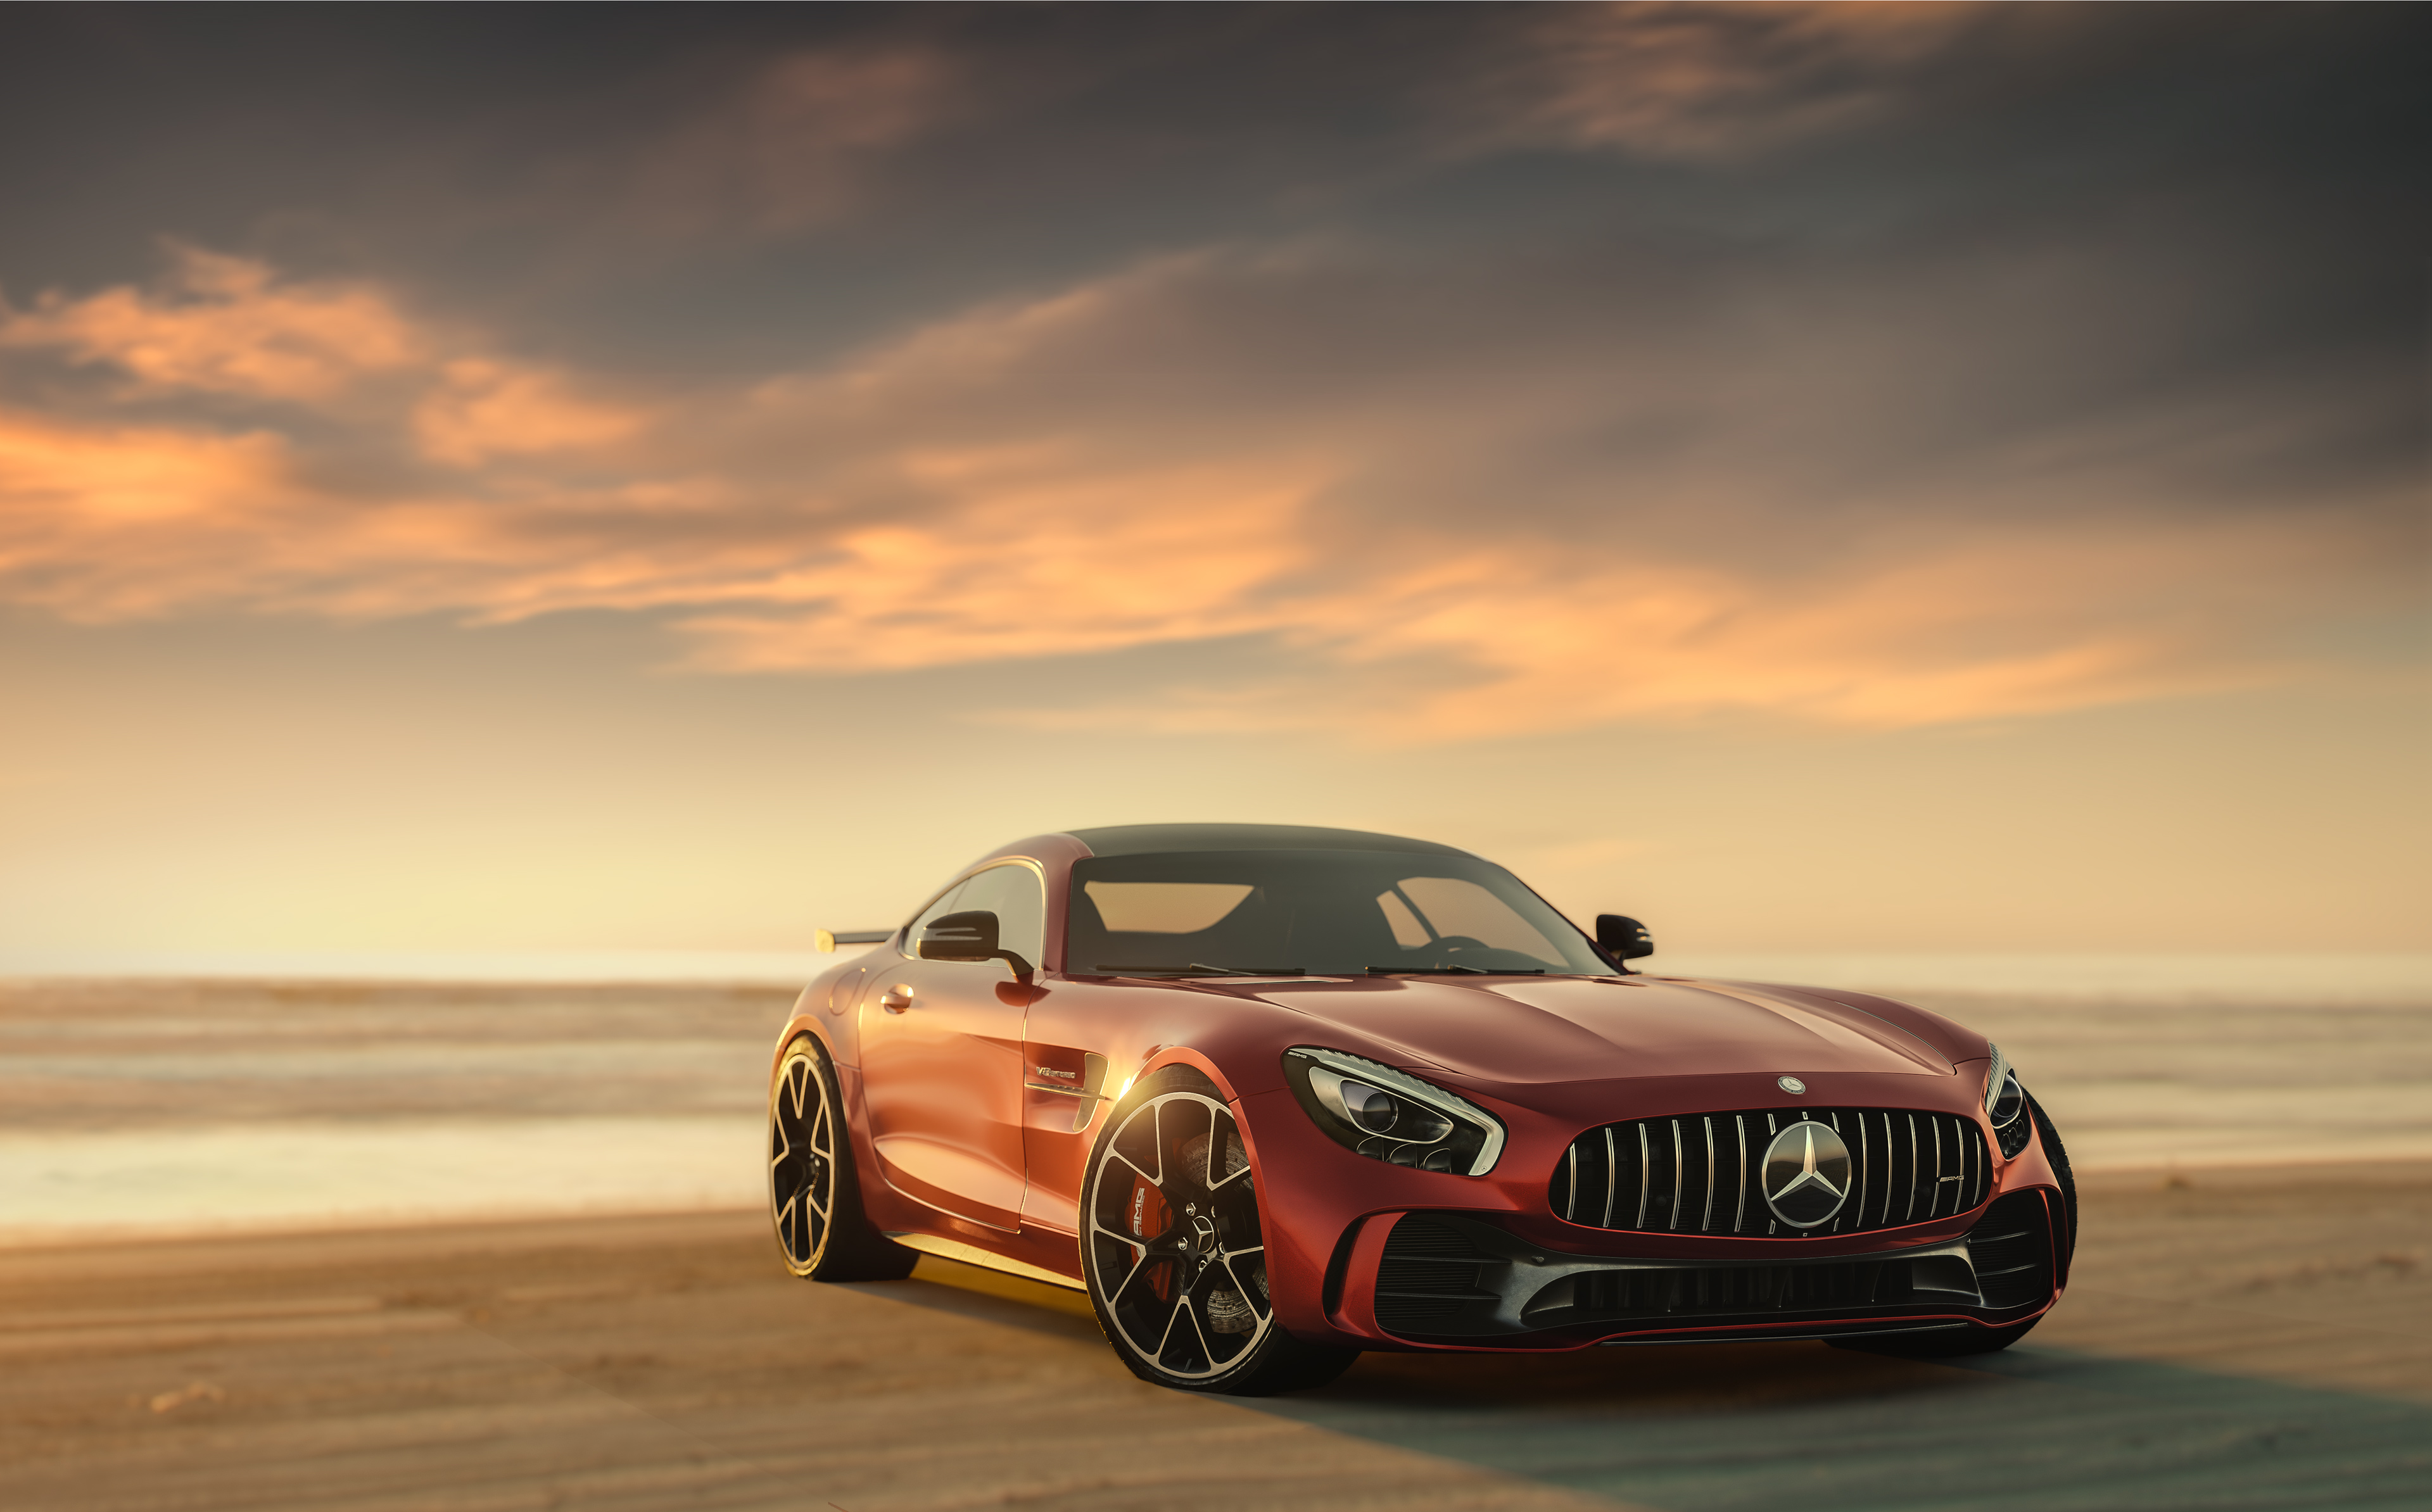 Mercedes Benz Red Car Wallpapers Rev Up Your Screens With Stunning